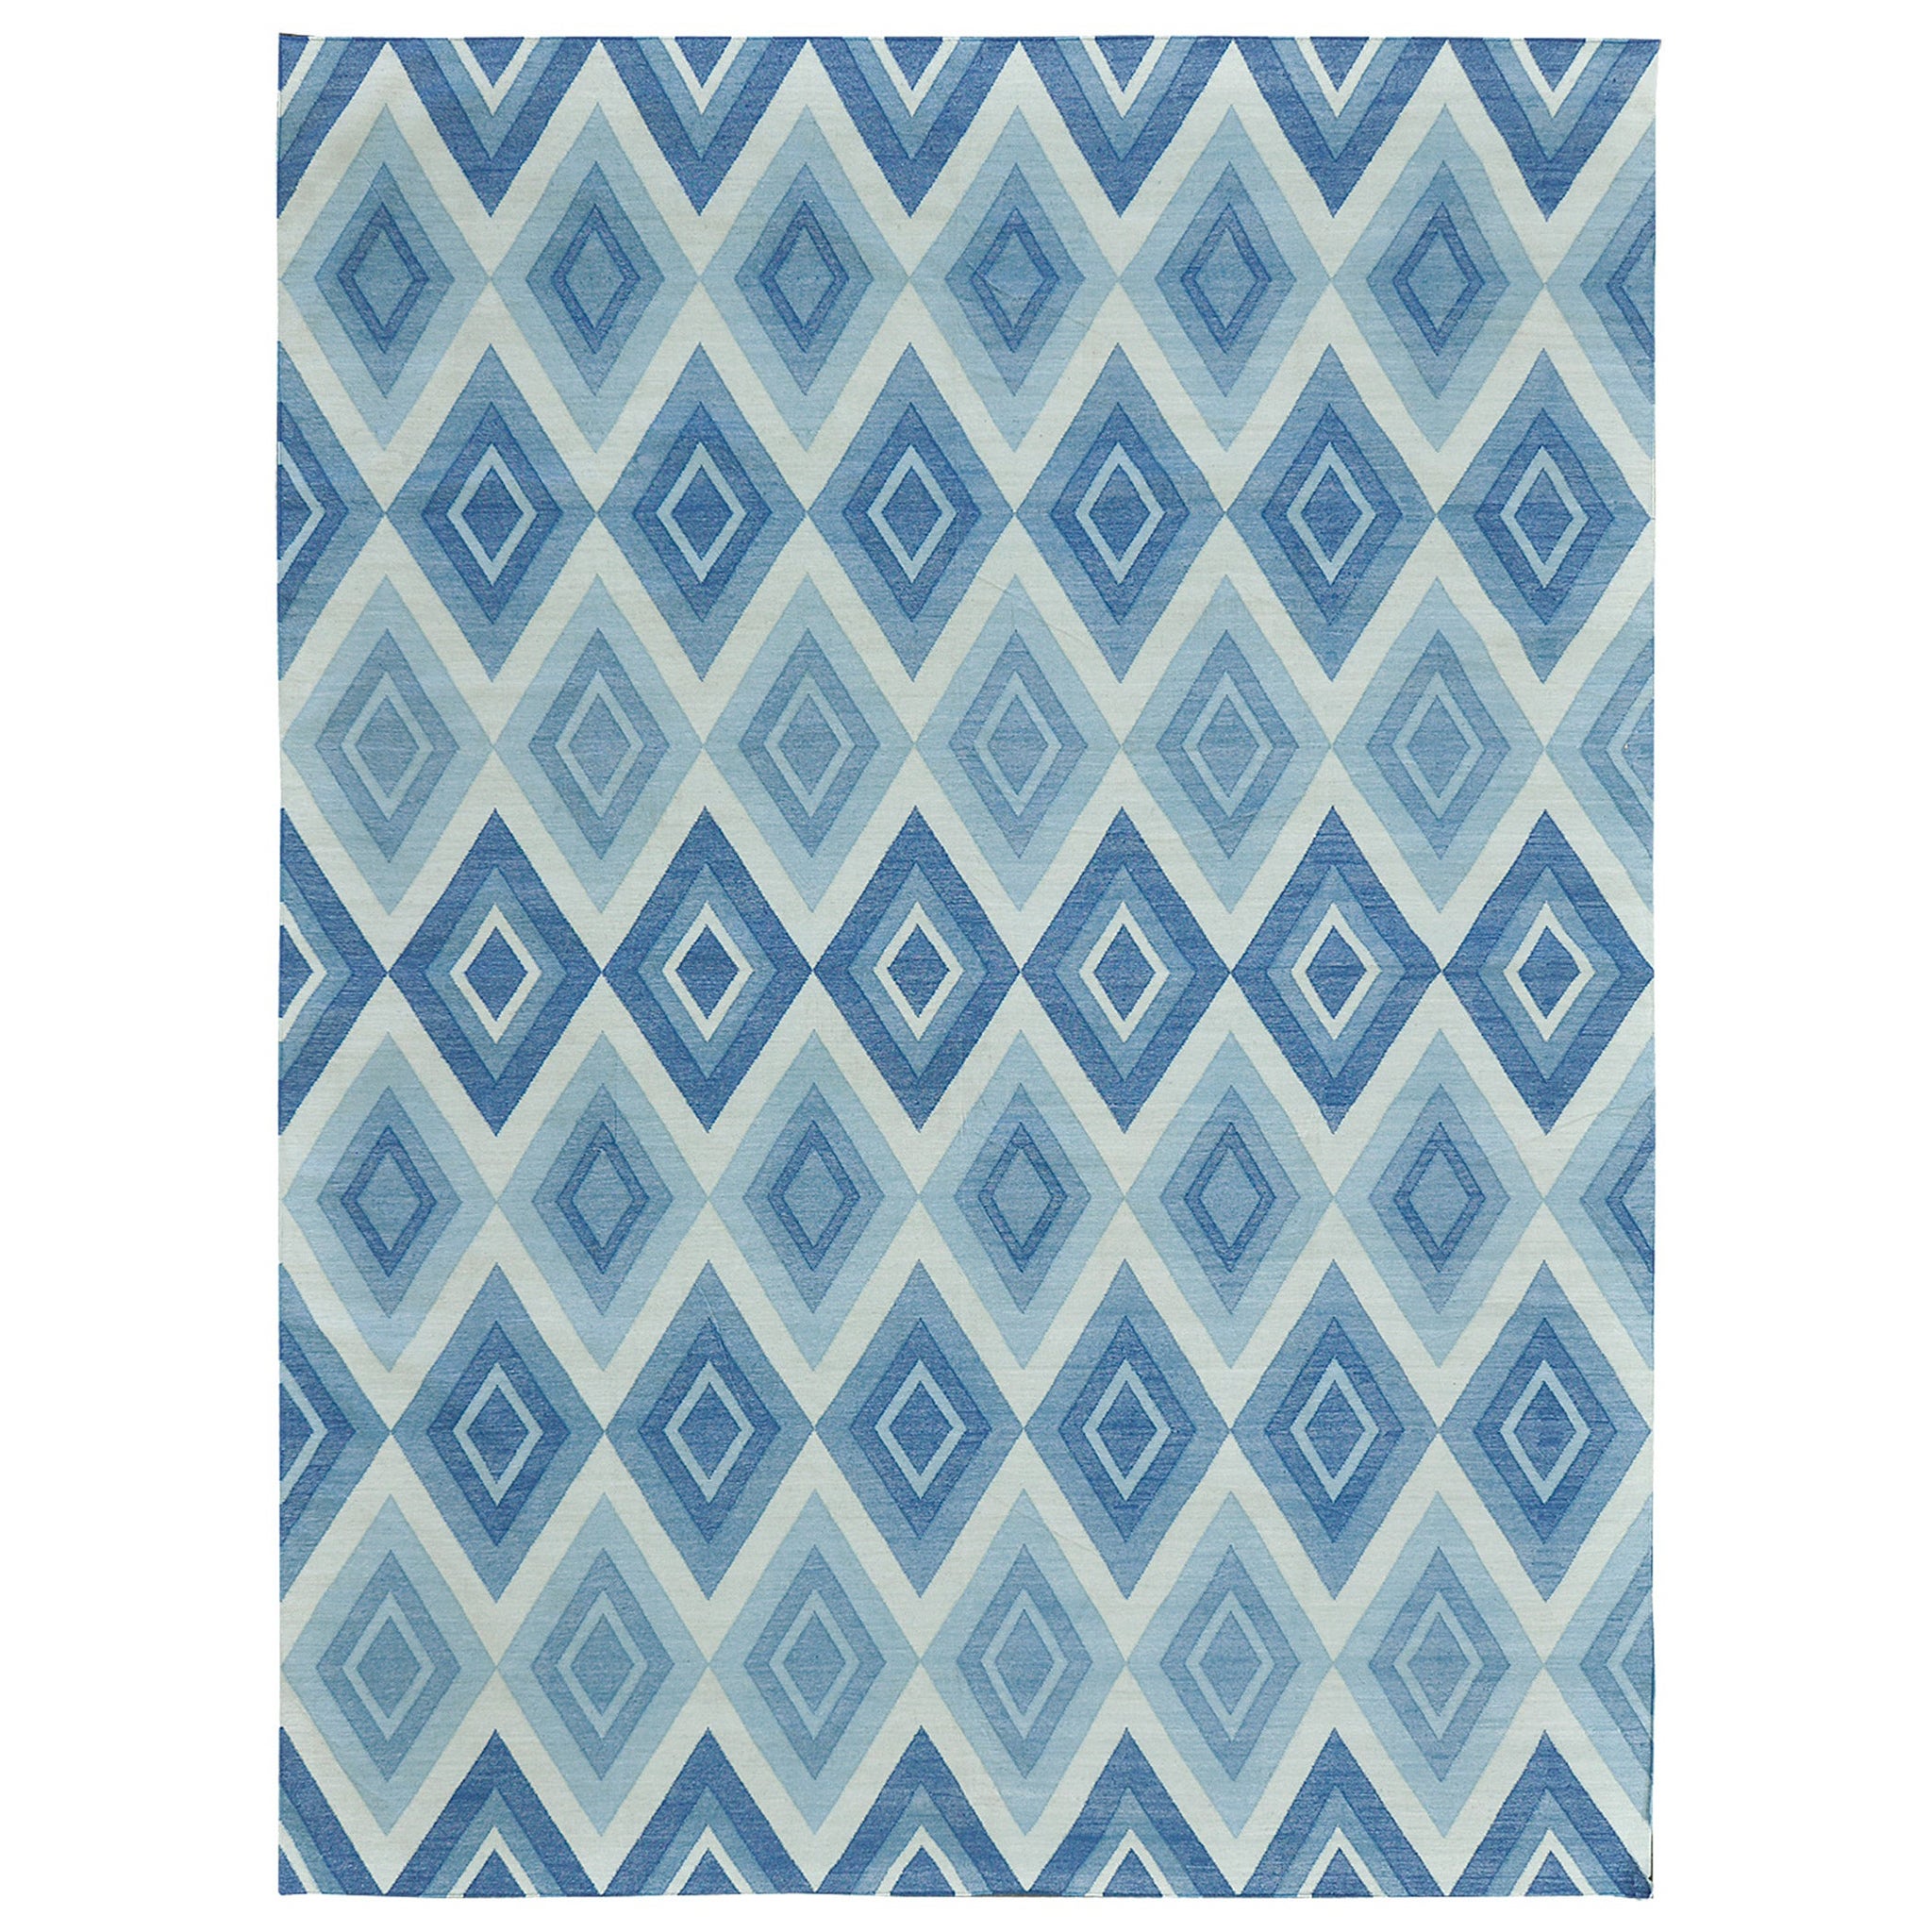 Contemporary Flat-Weave Rug Cielo Collection Permata Turquoise